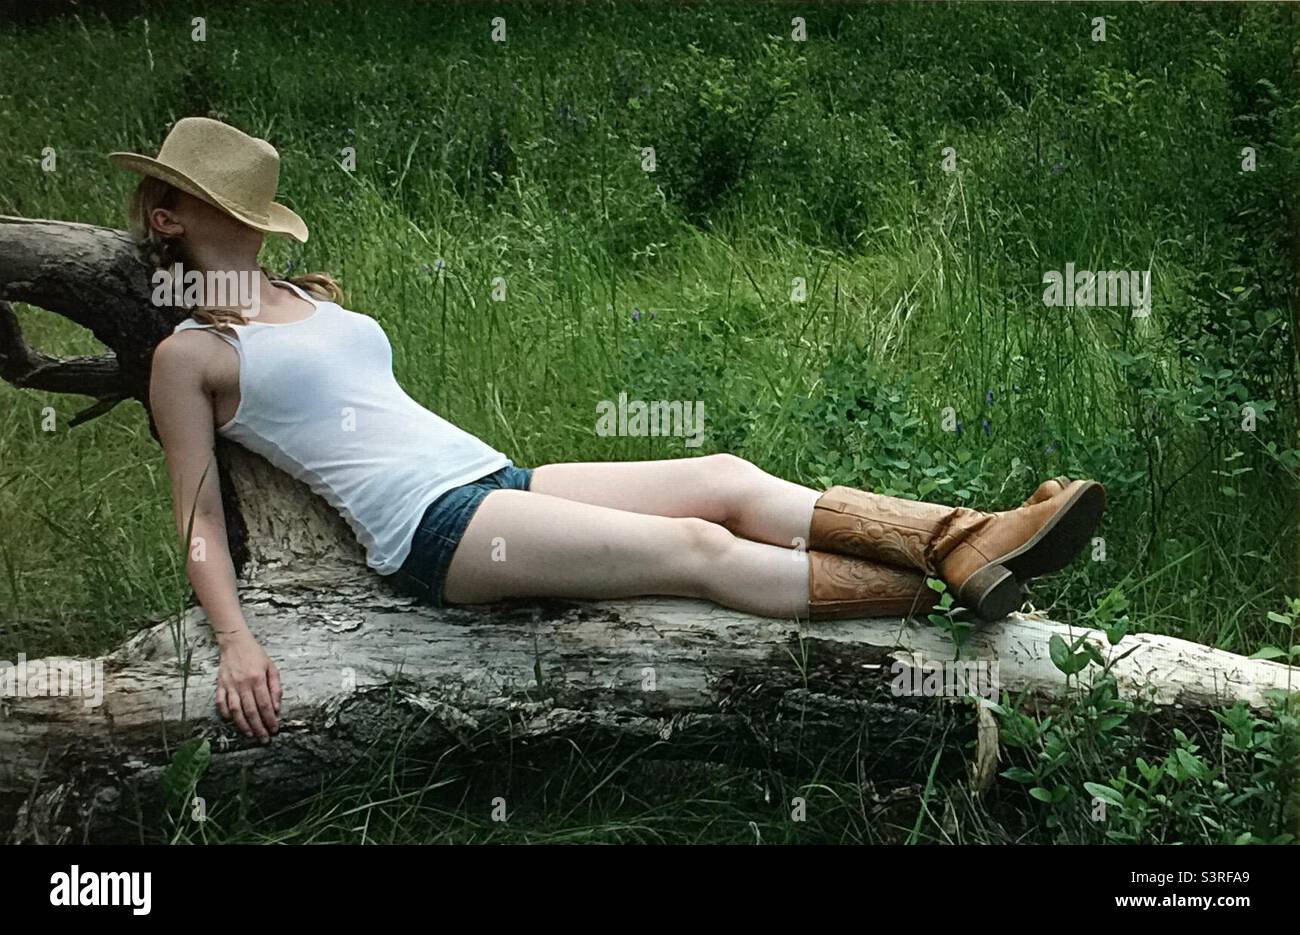 Thistle, weed, summer, shorts, grass, relaxing, resting, lazy day, park, hat, sleeping, boots Stock Photo